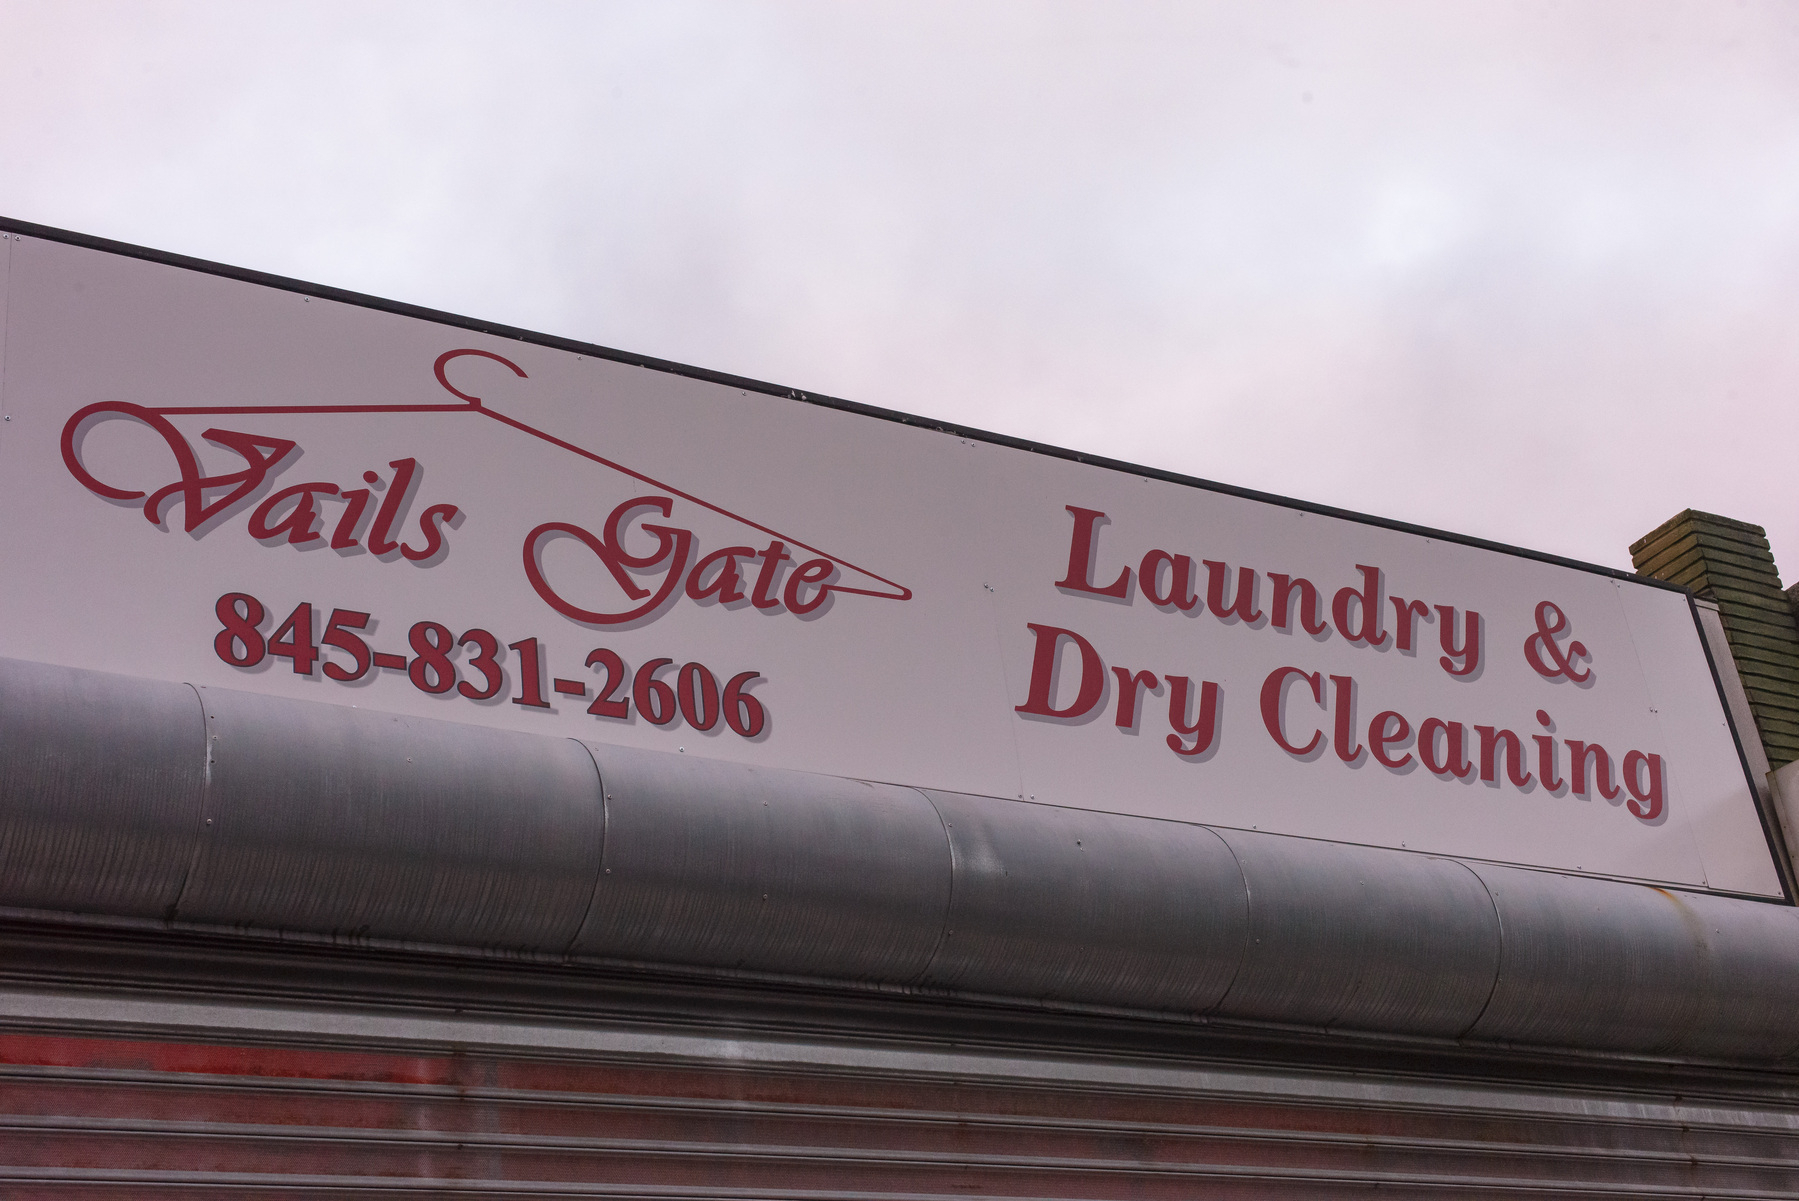 Signage for Vails Gate Laundry &amp; Dry Cleaning.